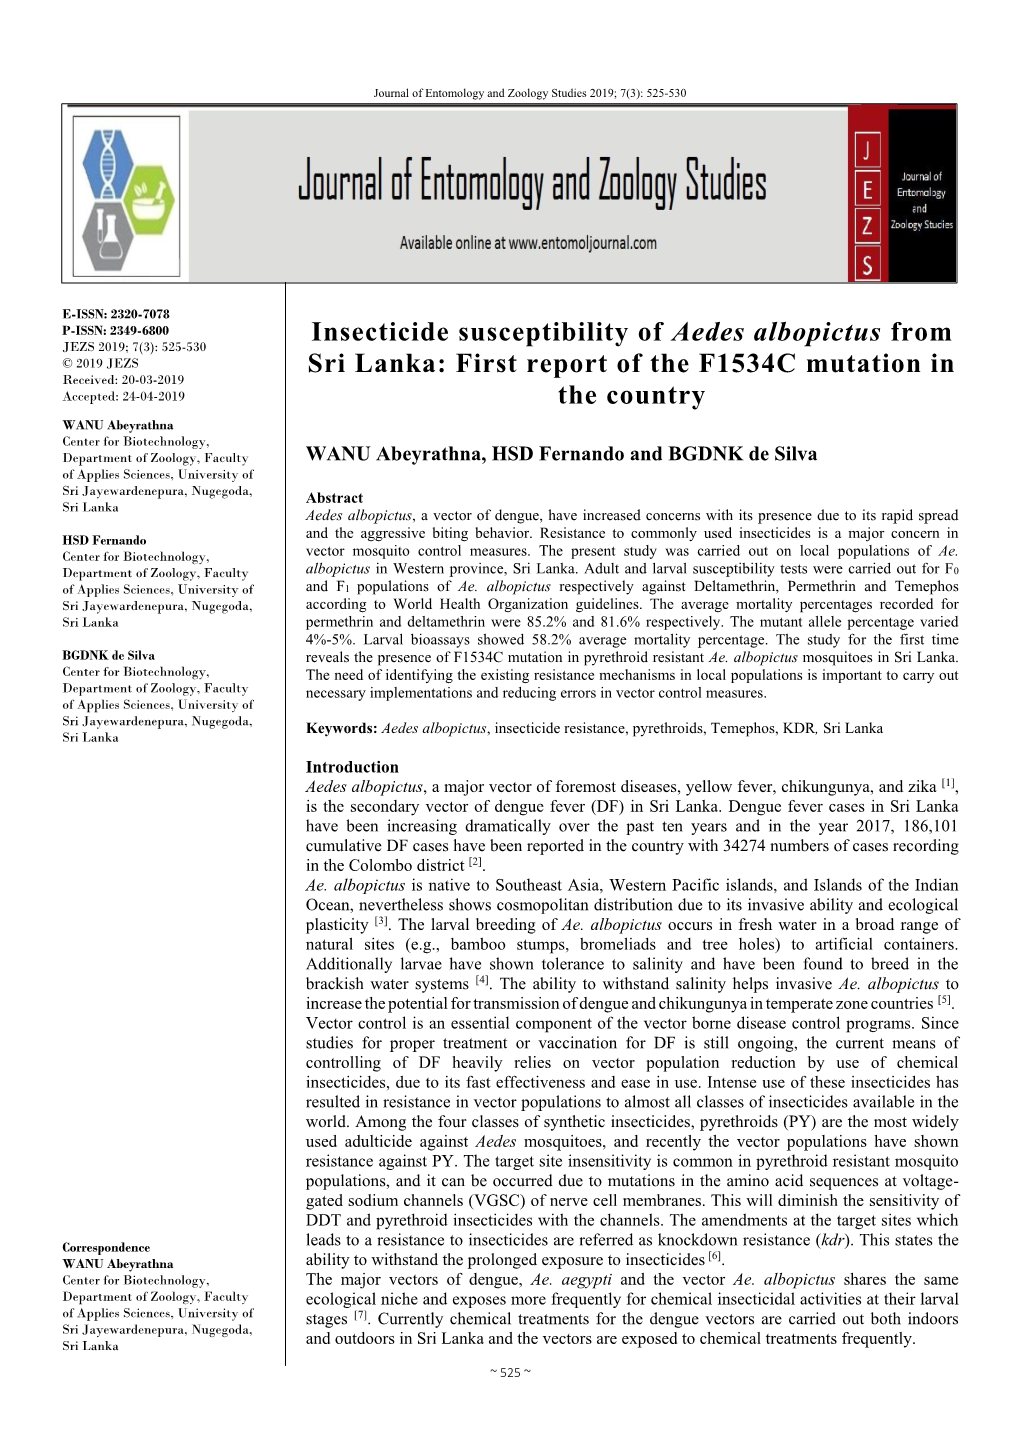 Insecticide Susceptibility of Aedes Albopictus from Sri Lanka